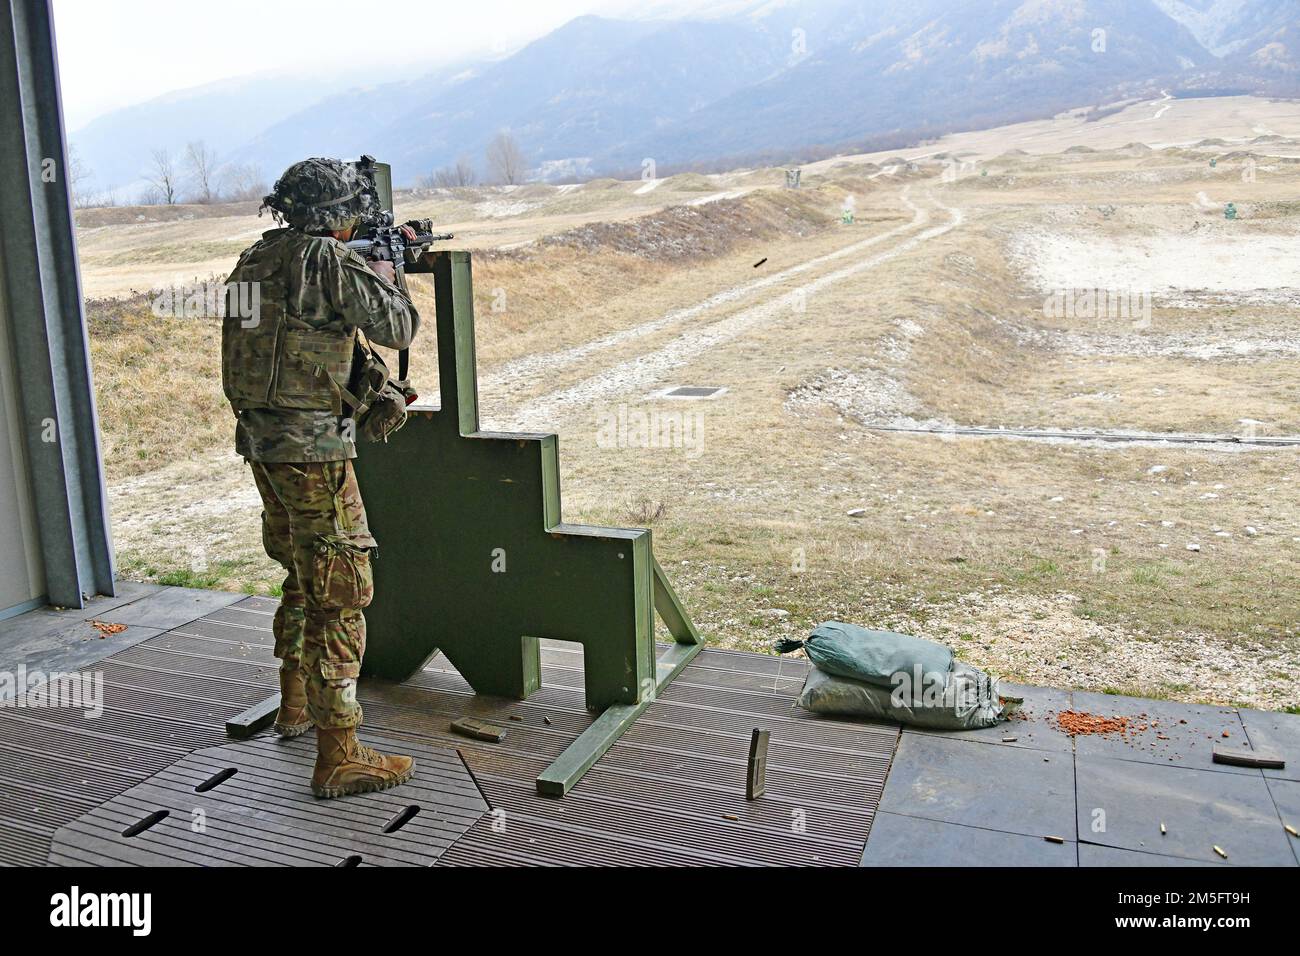 A U.S. Army Paratrooper, assigned to the 2nd Battalion, 503rd Infantry Regiment, 173rd Airborne Brigade, engages a pop-up targets with  an M4 carbine during marksmanship training at Cao Malnisio Range, Pordenone, Italy, March 15, 2022. The 173rd Airborne Brigade is the U.S. Army’s Contingency Response Force in Europe, providing rapidly deployable forces to United States European, African, and Central Command areas of responsibility. Stock Photo